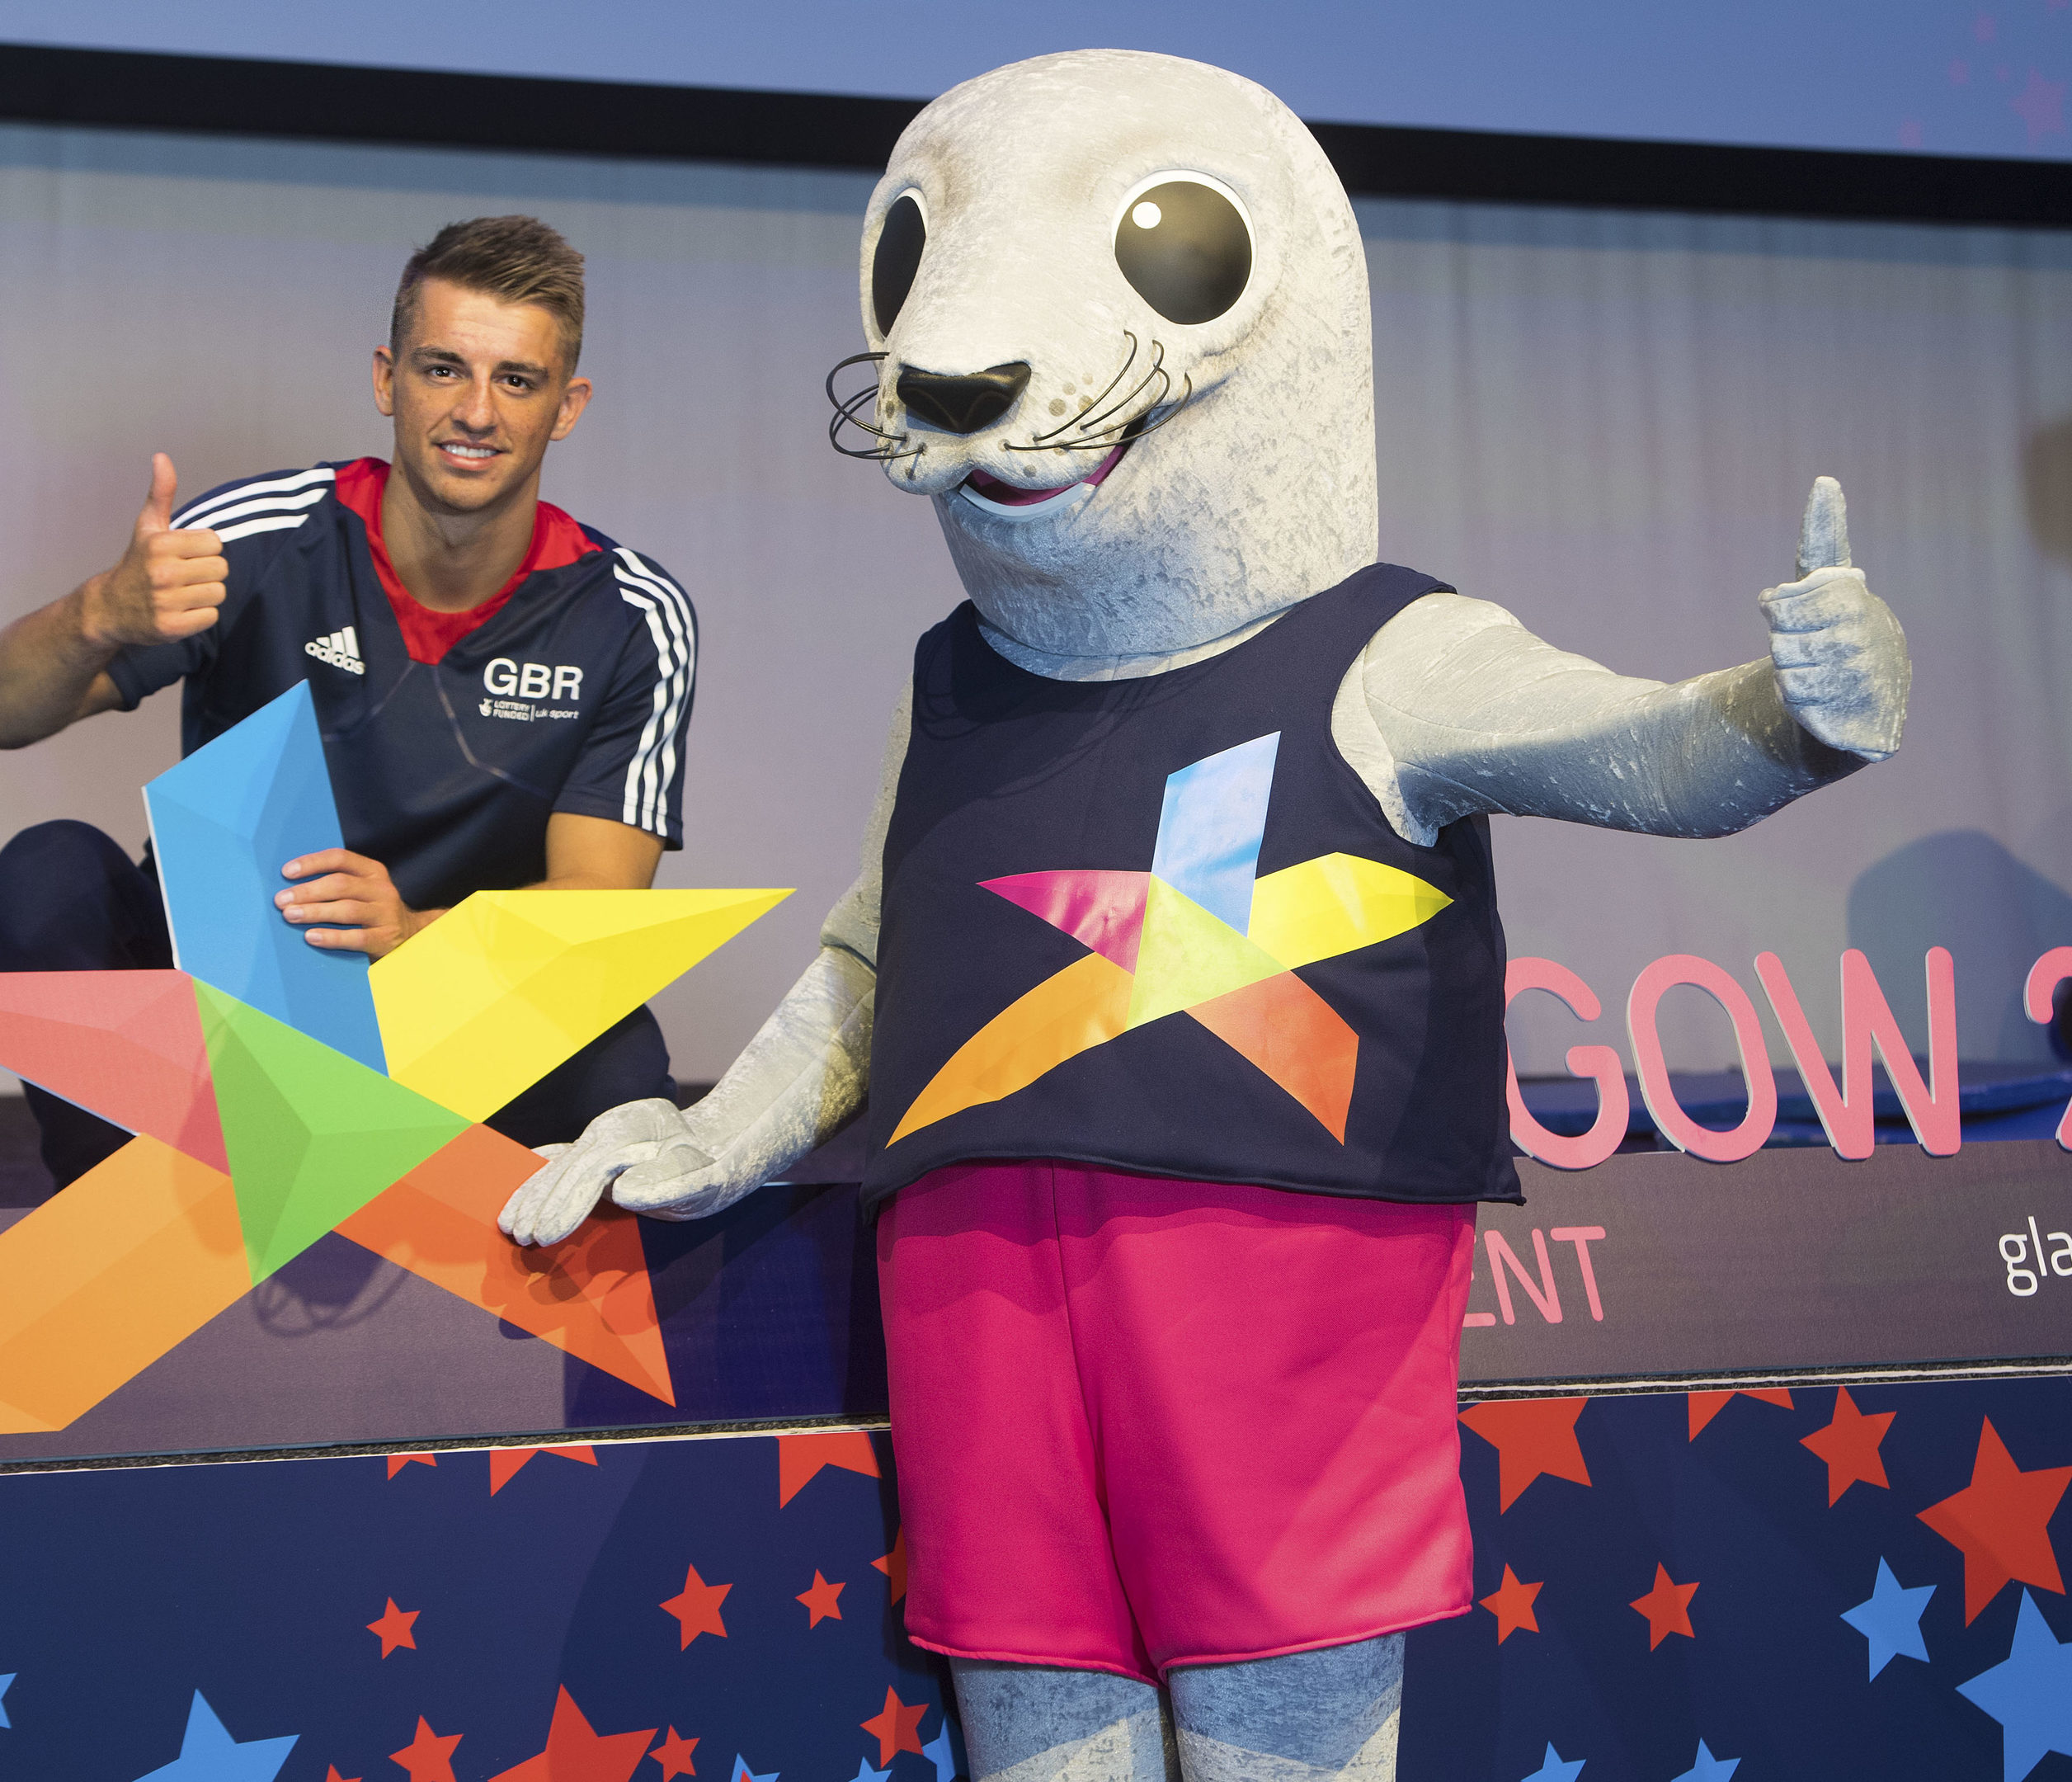 Glasgow 2018 got a big thumbs-up from gymnast Max Whitlock.